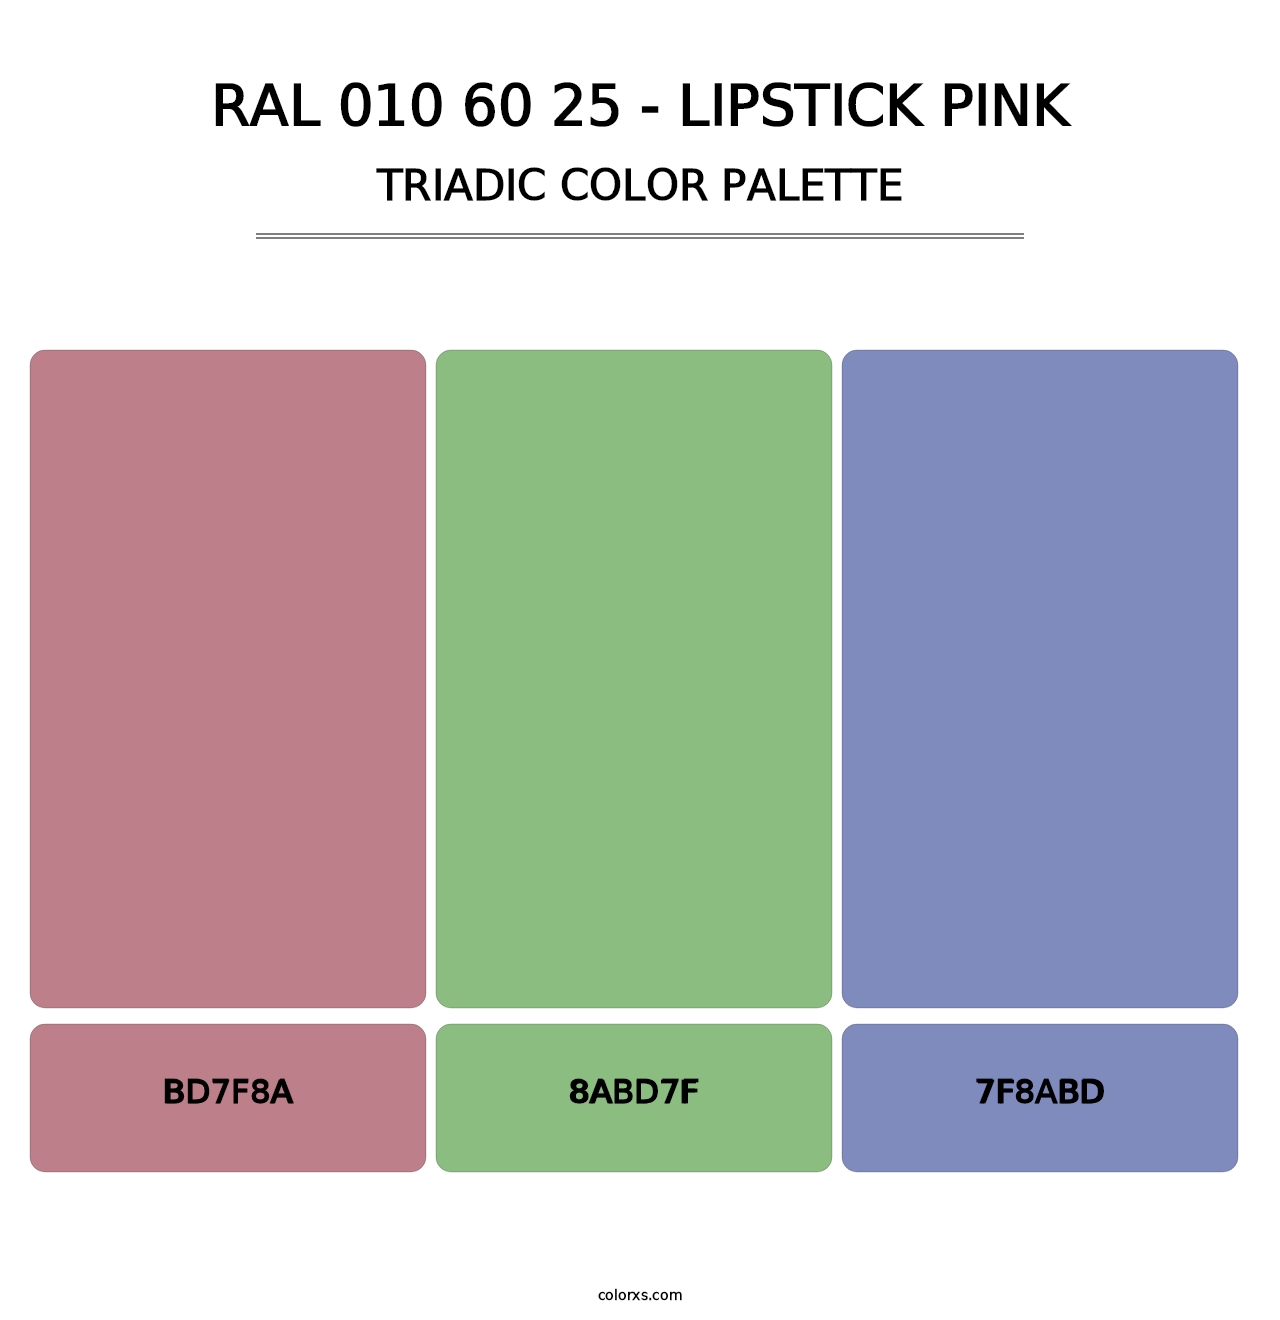 RAL 010 60 25 - Lipstick Pink - Triadic Color Palette